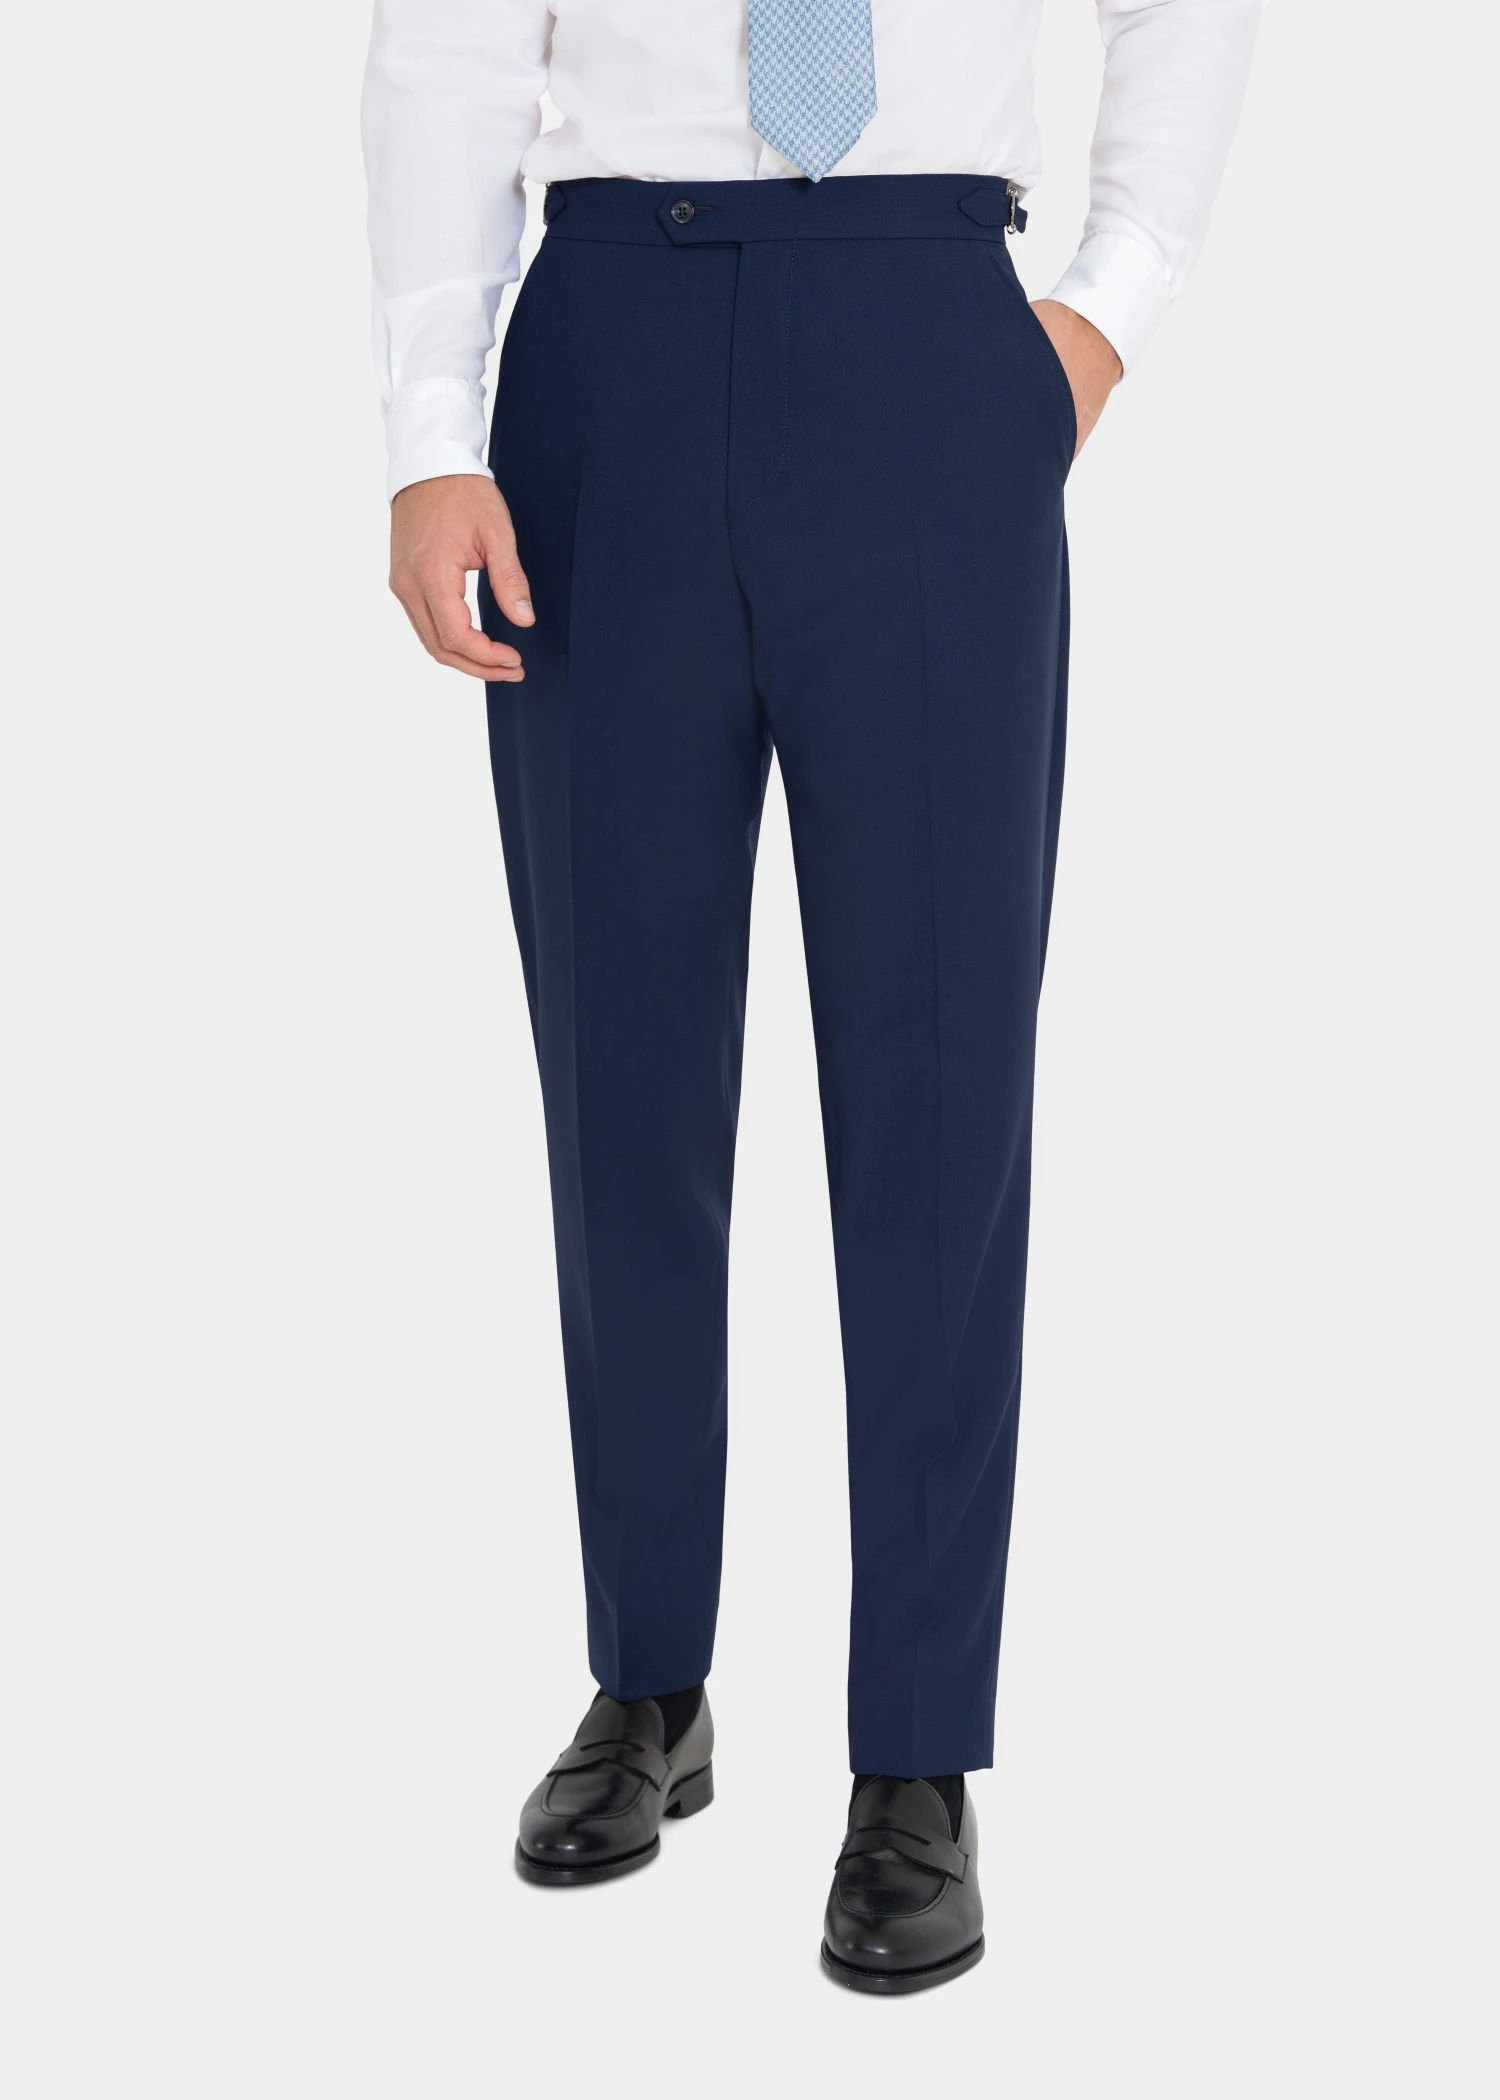 blue suit trousers in twistair fabric